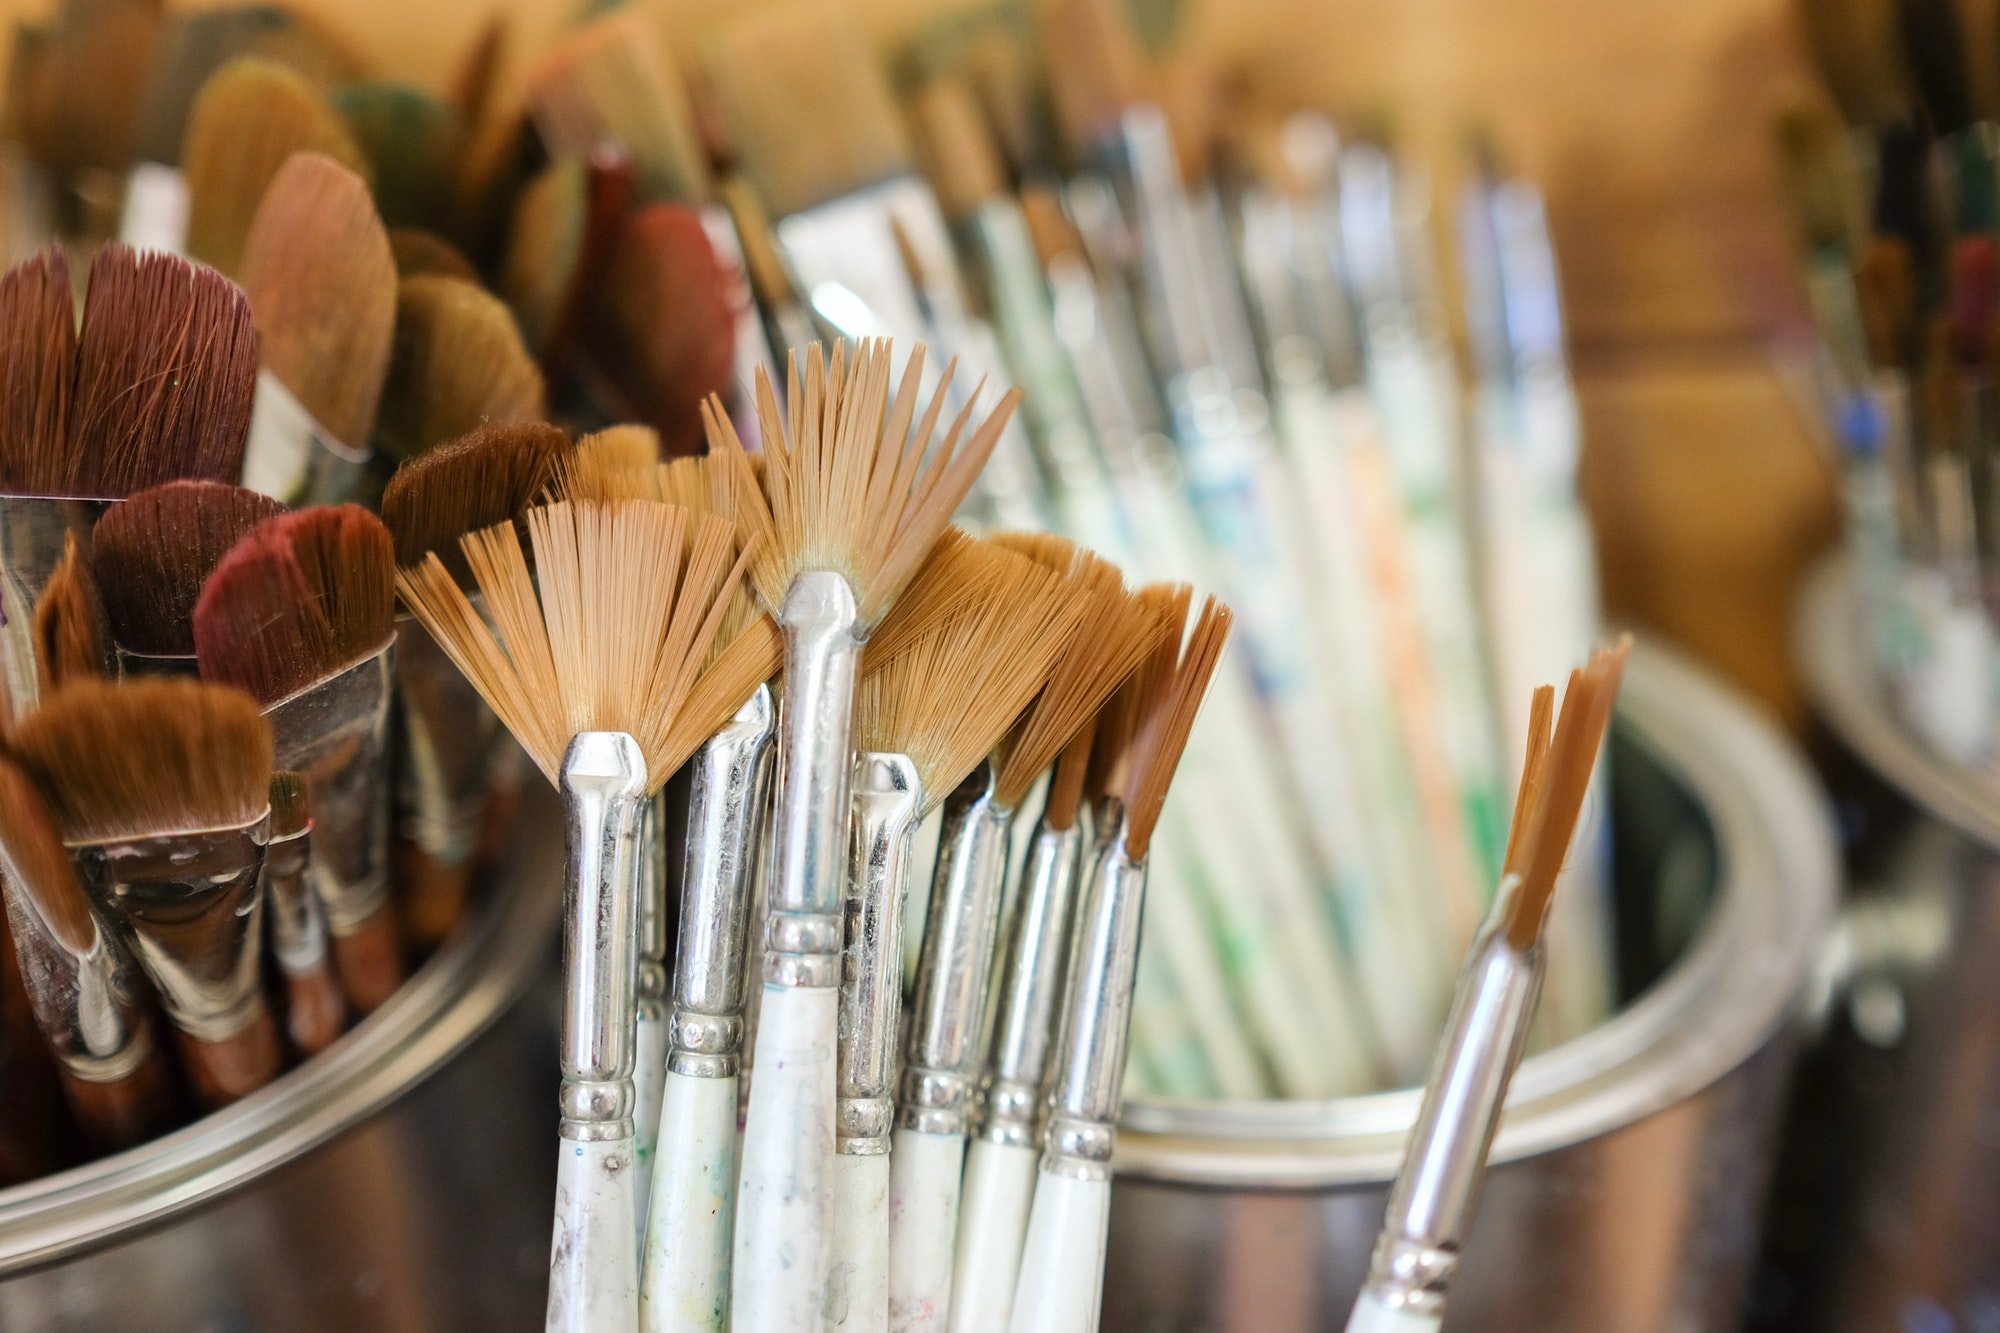 Paintbrushes and other art supplies in an art studio